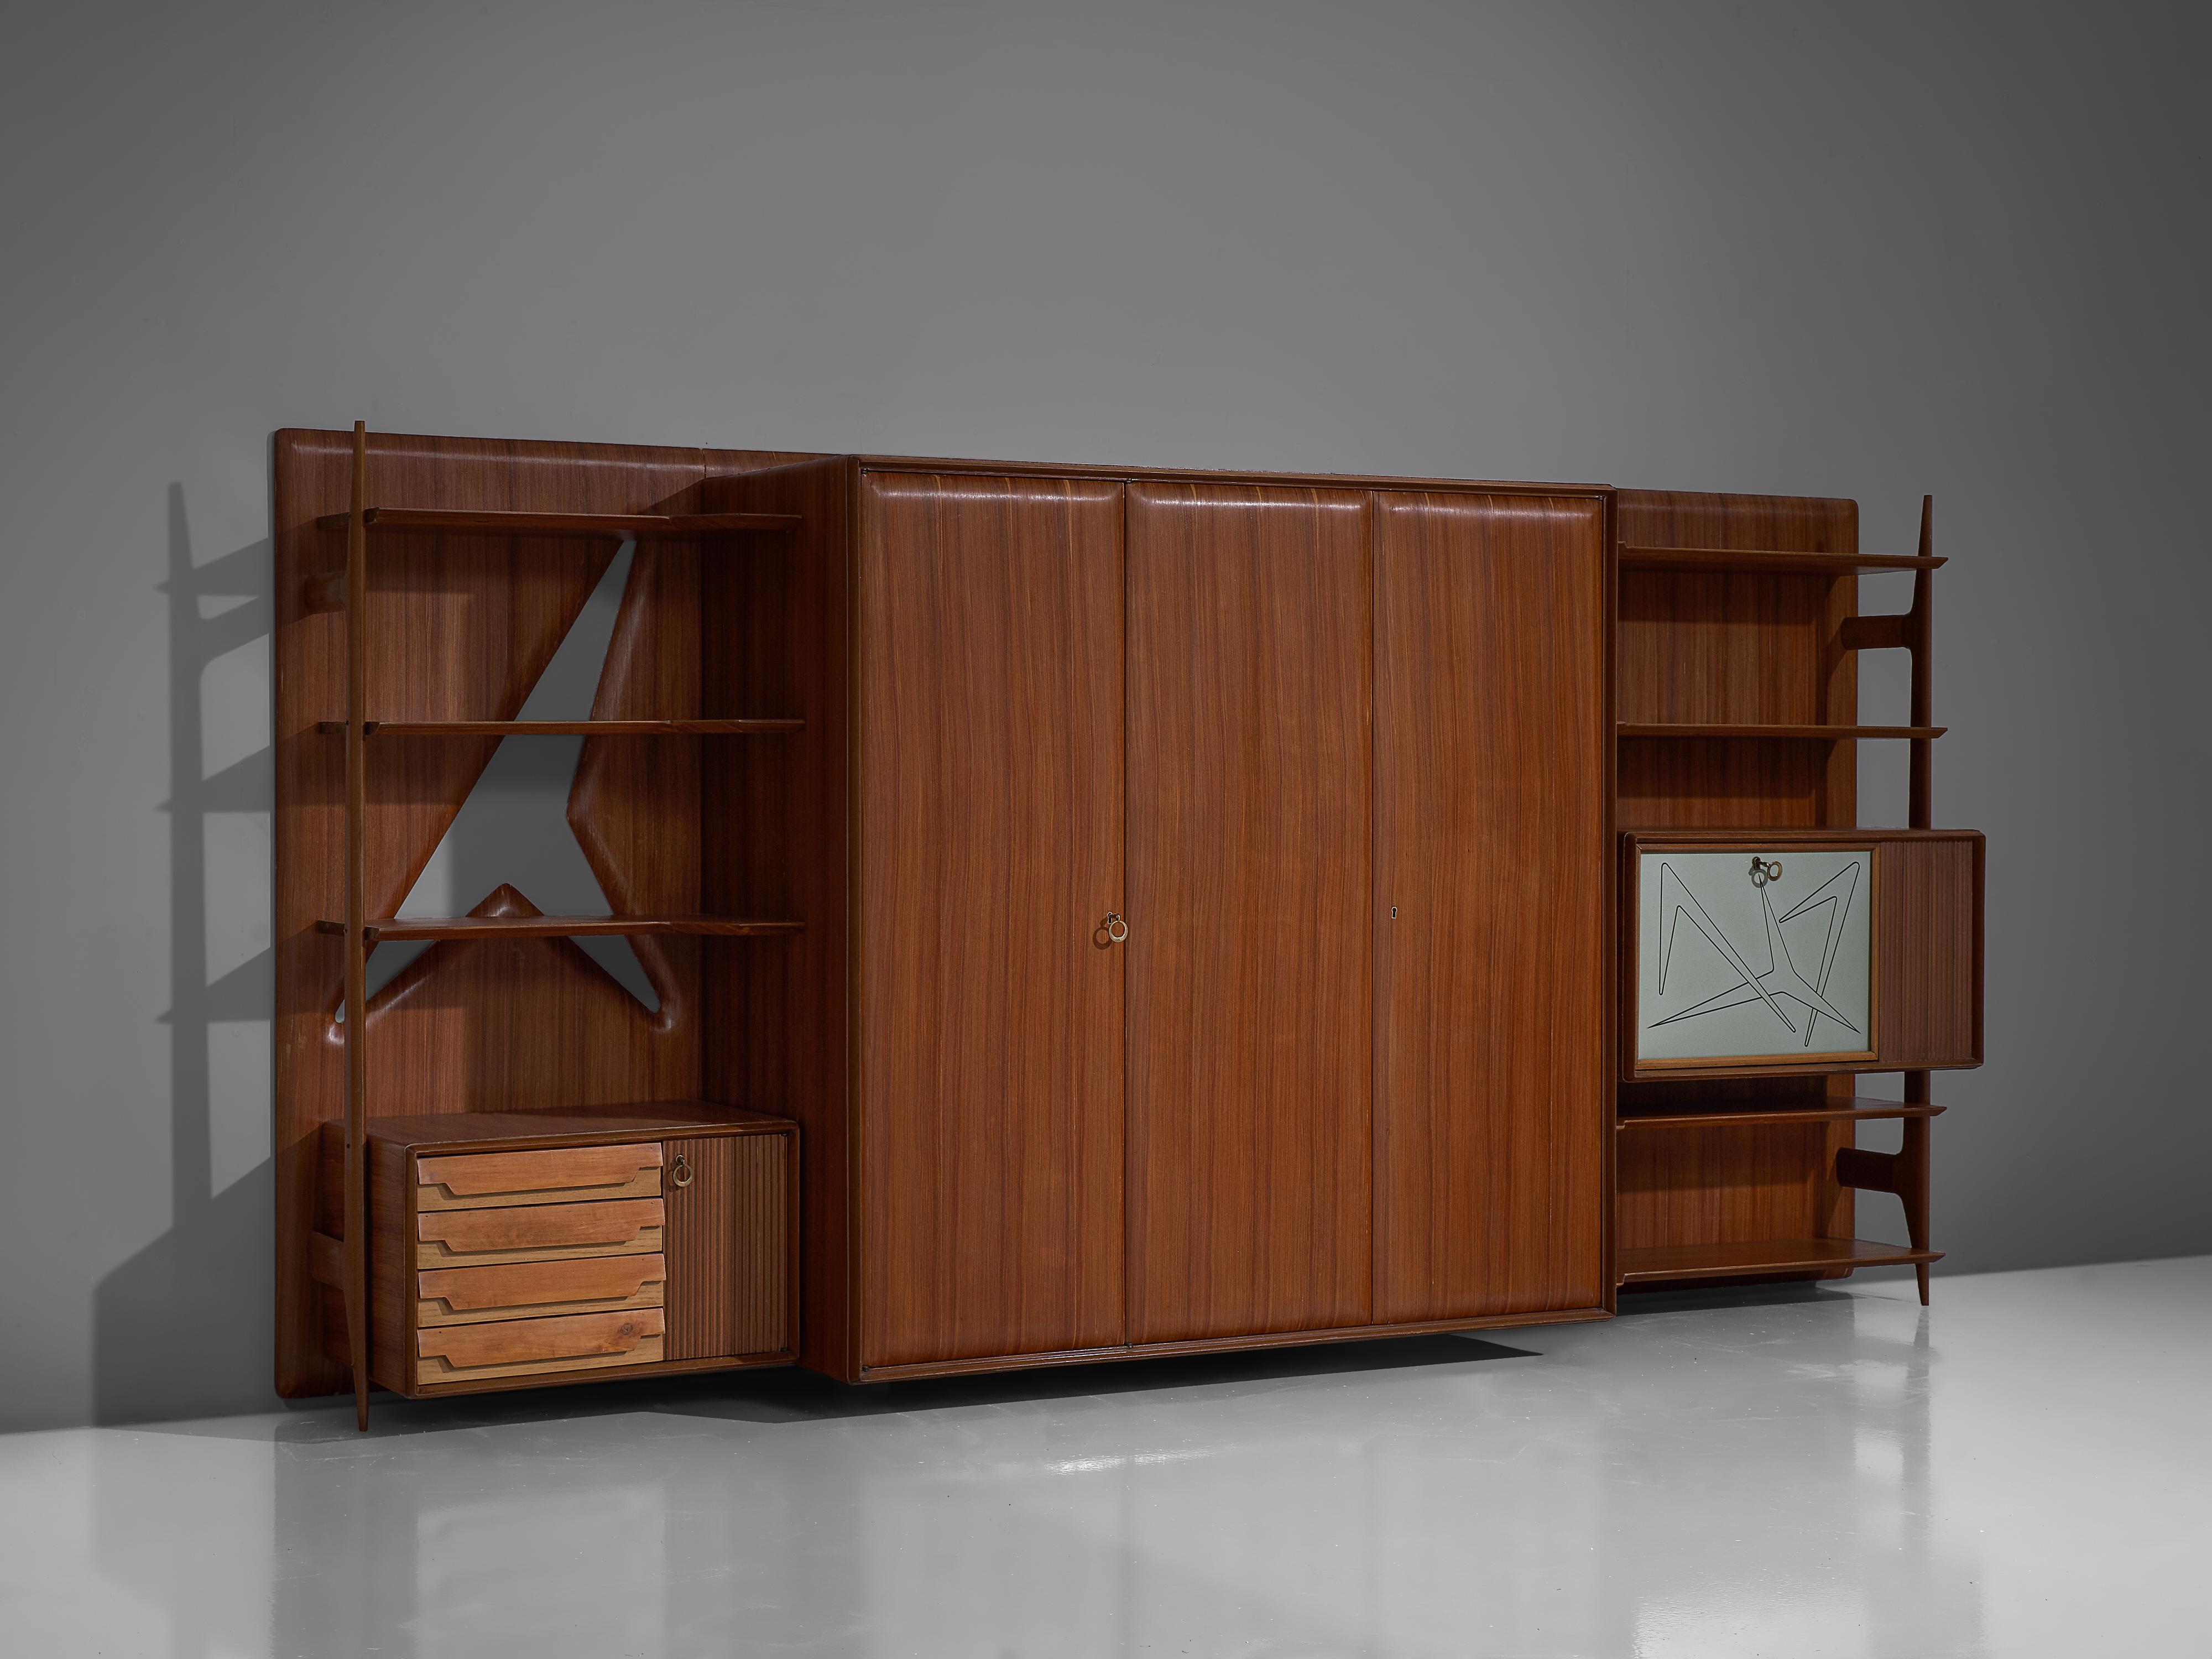 Wall unit, mahogany, lacquered wood, brass, glass, Italy, 1960s.

This Italian wall unit convinces both visual and functional. It offers a variety of different storage possibilities. A three door cabinet is placed in the centrum which provides a